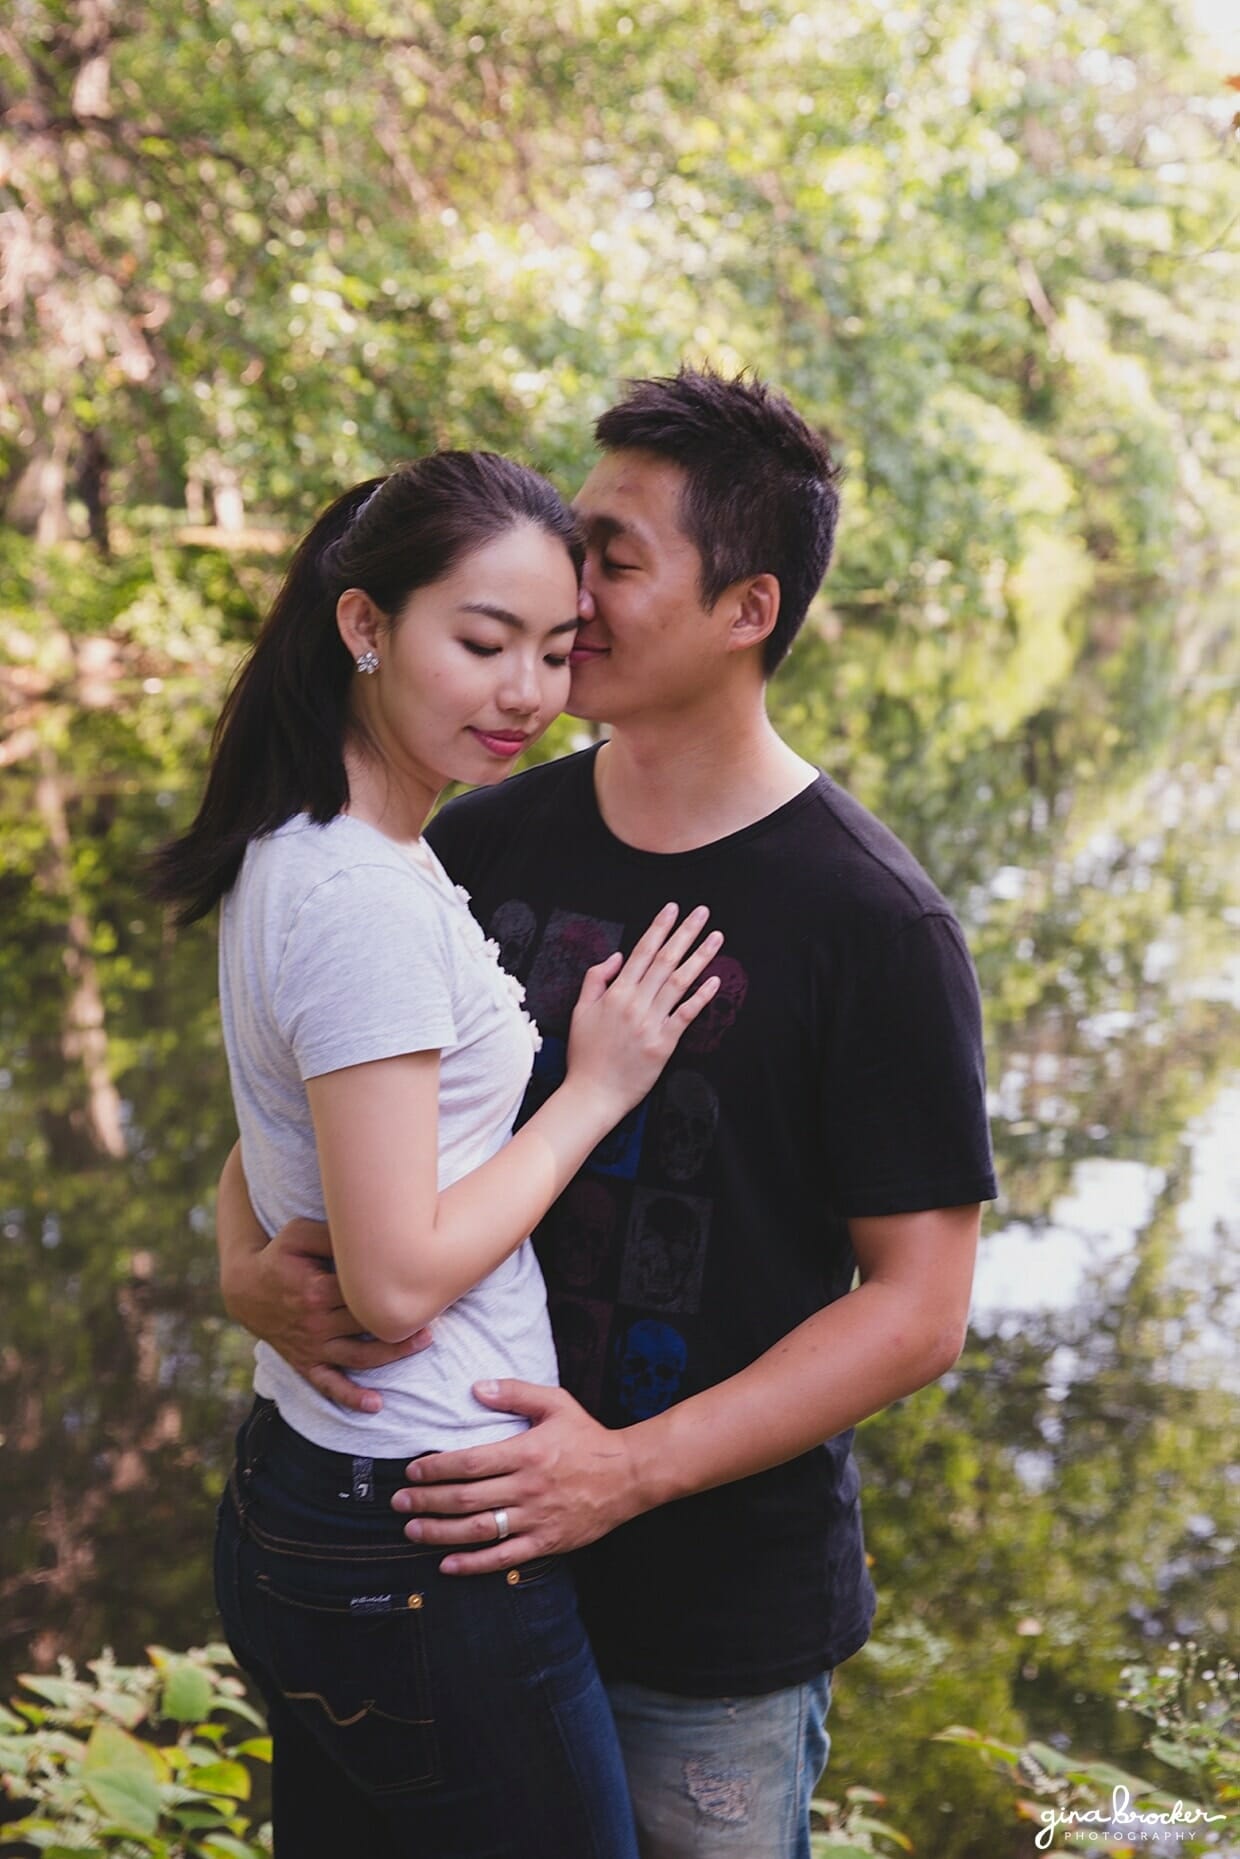 A couple cuddle by the trees during their park engagement session in Boston's back bay fens